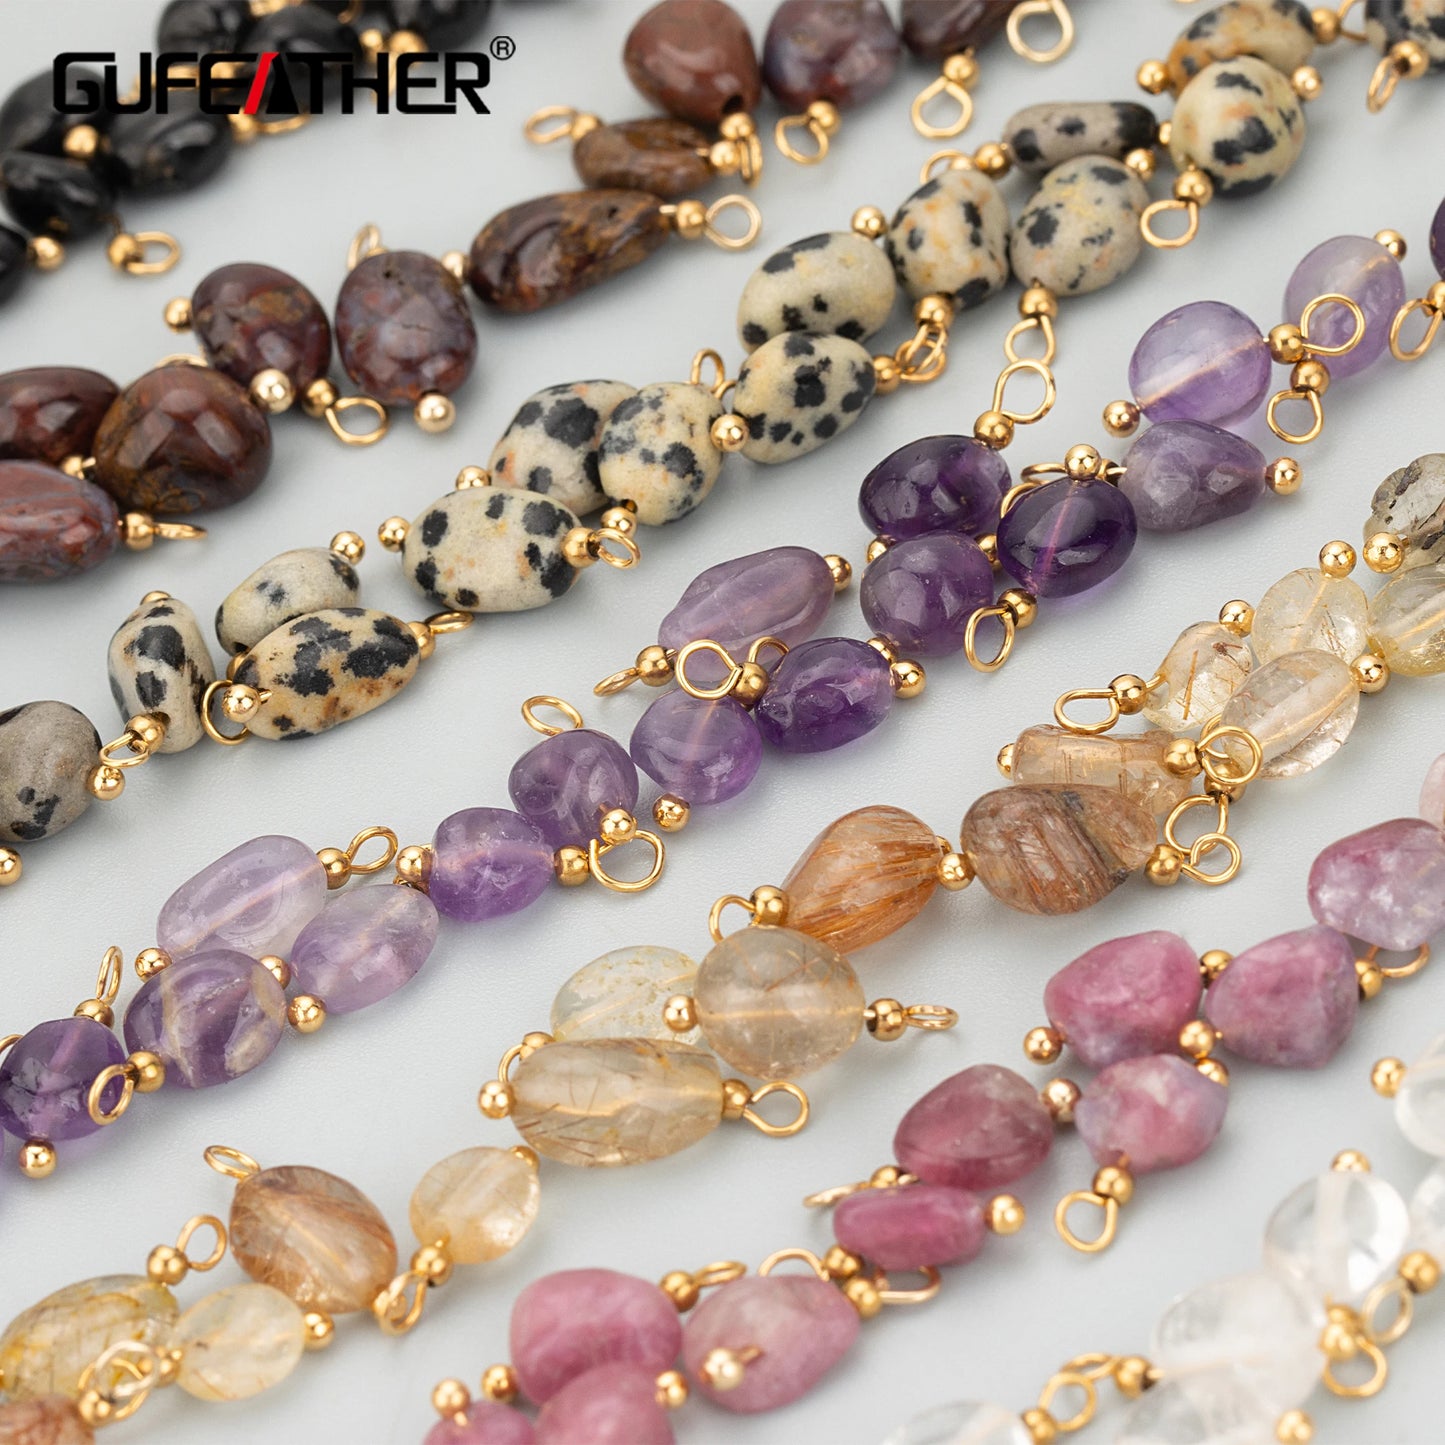 GUFEATHER ME17,jewelry accessories,stainless steel,natural stone,hand made,charms,diy pendants,jewelry making,20pcs/lot